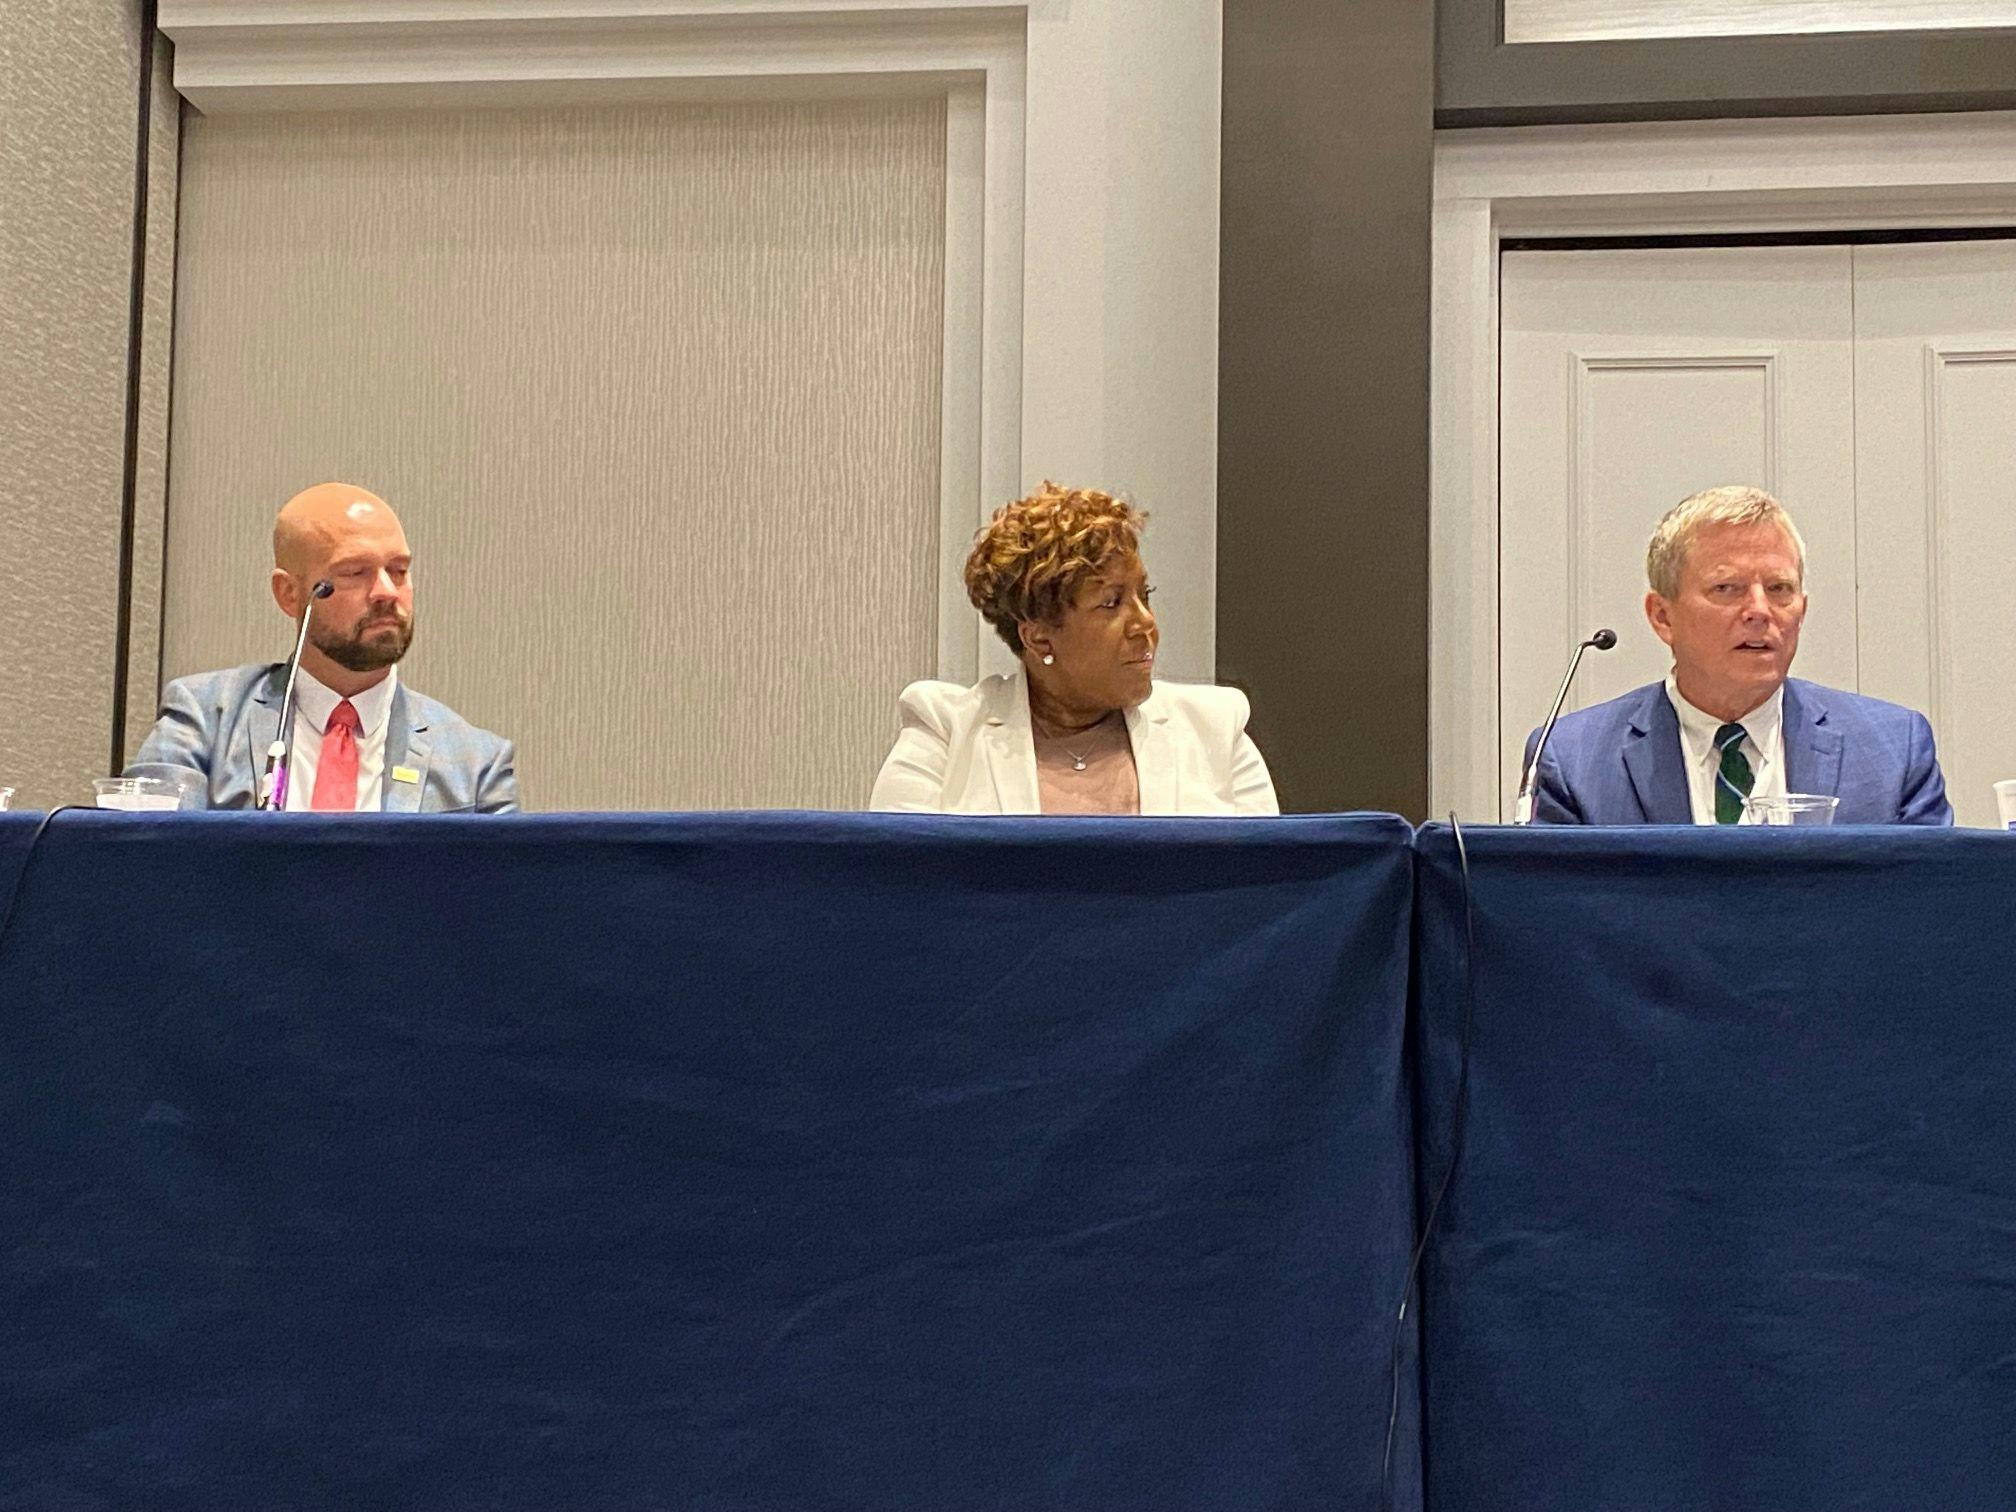 From left, Erik Martin, VP, patient care services and chief nursing officer, Norton Children’s Hospital; Nikki Sumpter, executive vice president, chief administrative officer, Atlantic Health System; and Michael Ivy, deputy chief medical officer, Yale New Haven Health, at the American Hospital Association Leadership Summit, Monday, July 18.